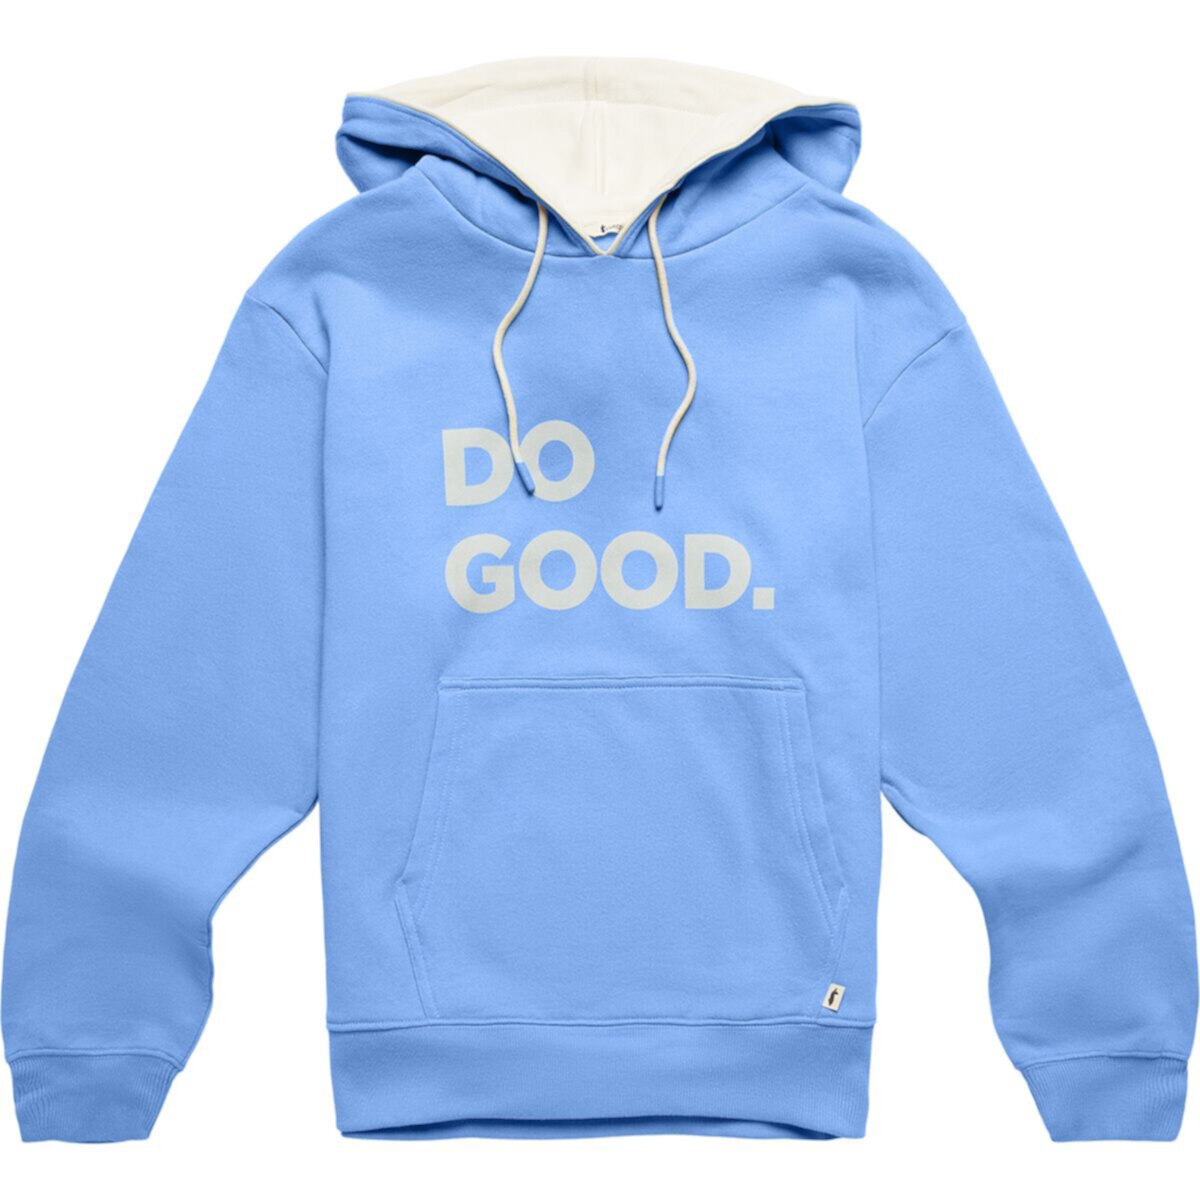 Do Good Hoodie Cotopaxi